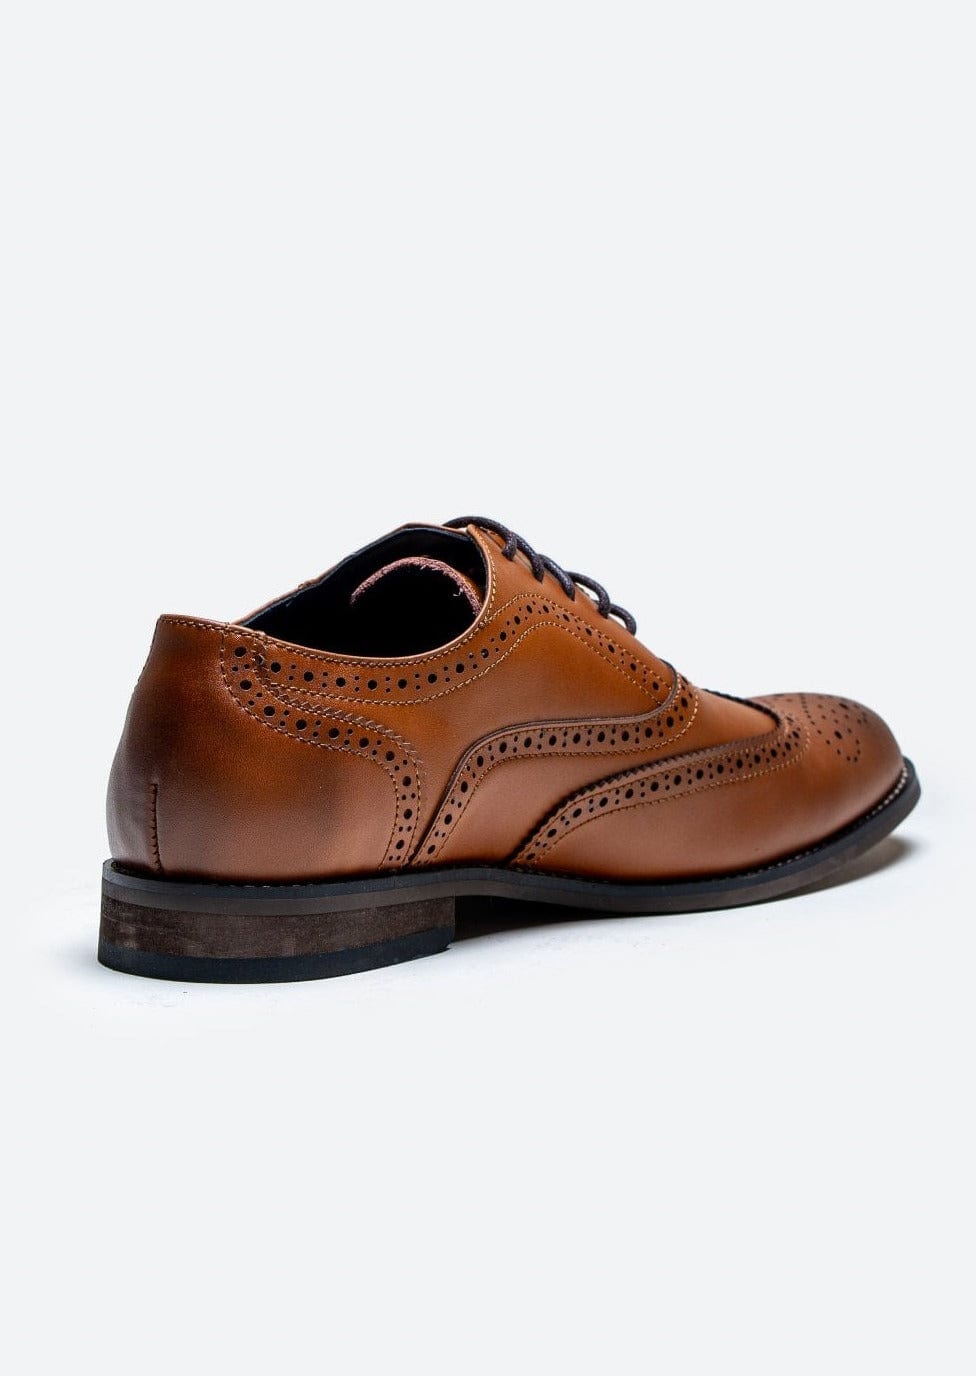 CLARK TAN LEATHER BROGUE SHOES